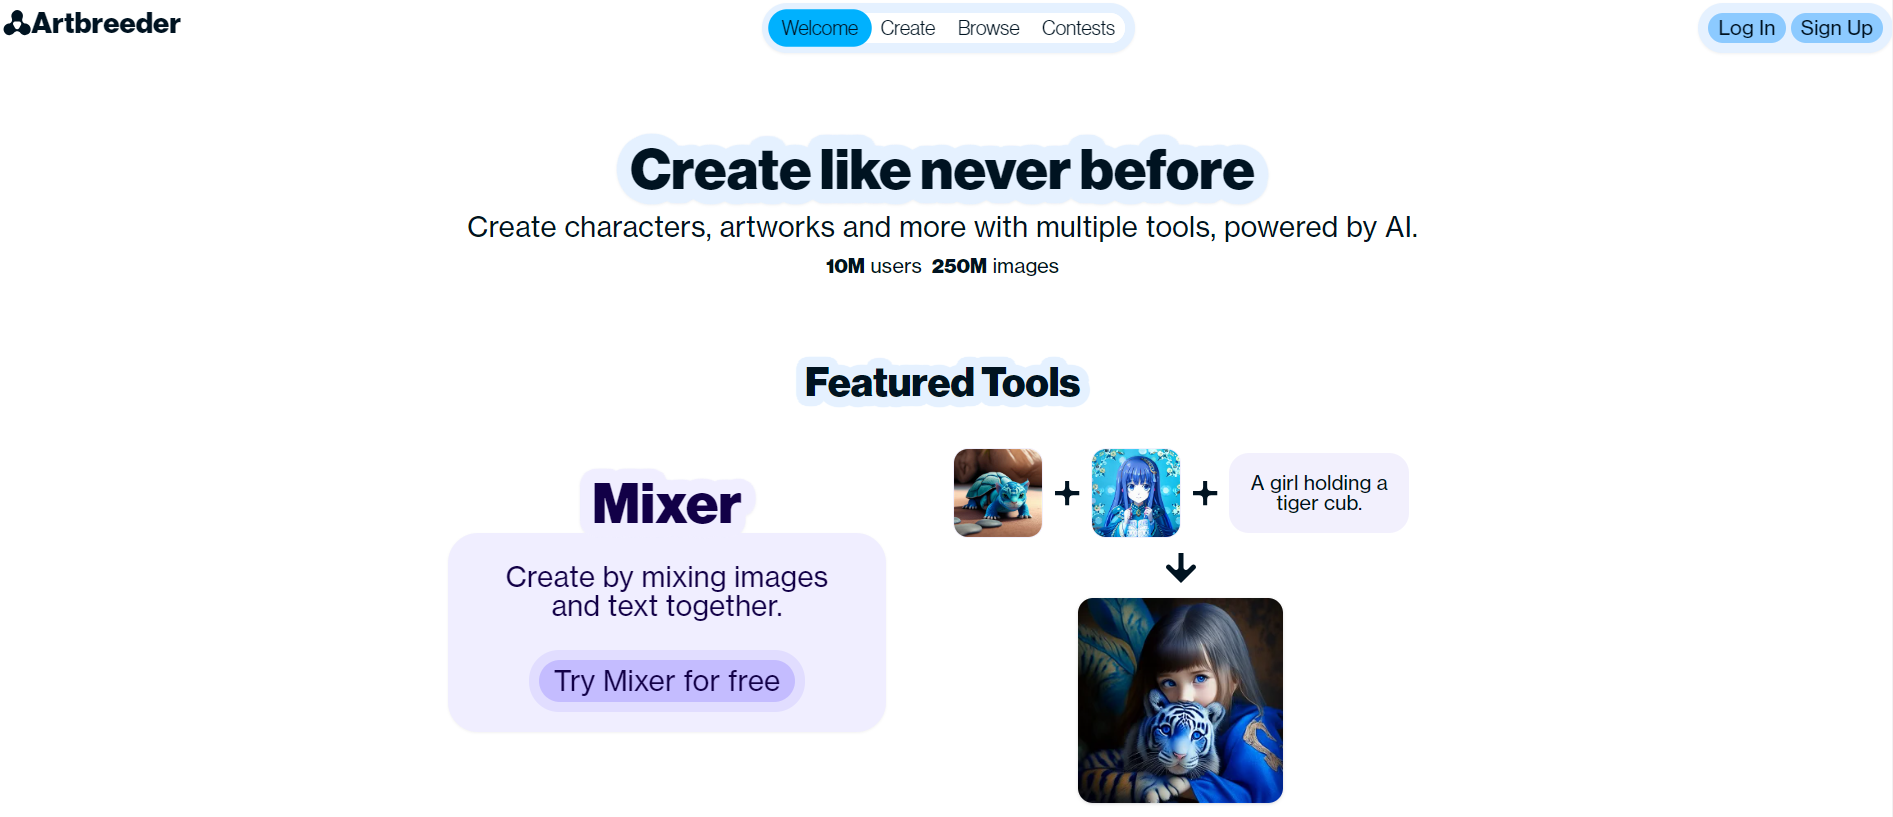 Artbreeder's home page featuring the 'Mixer' tool, which allows users to create unique images by combining various elements and AI.